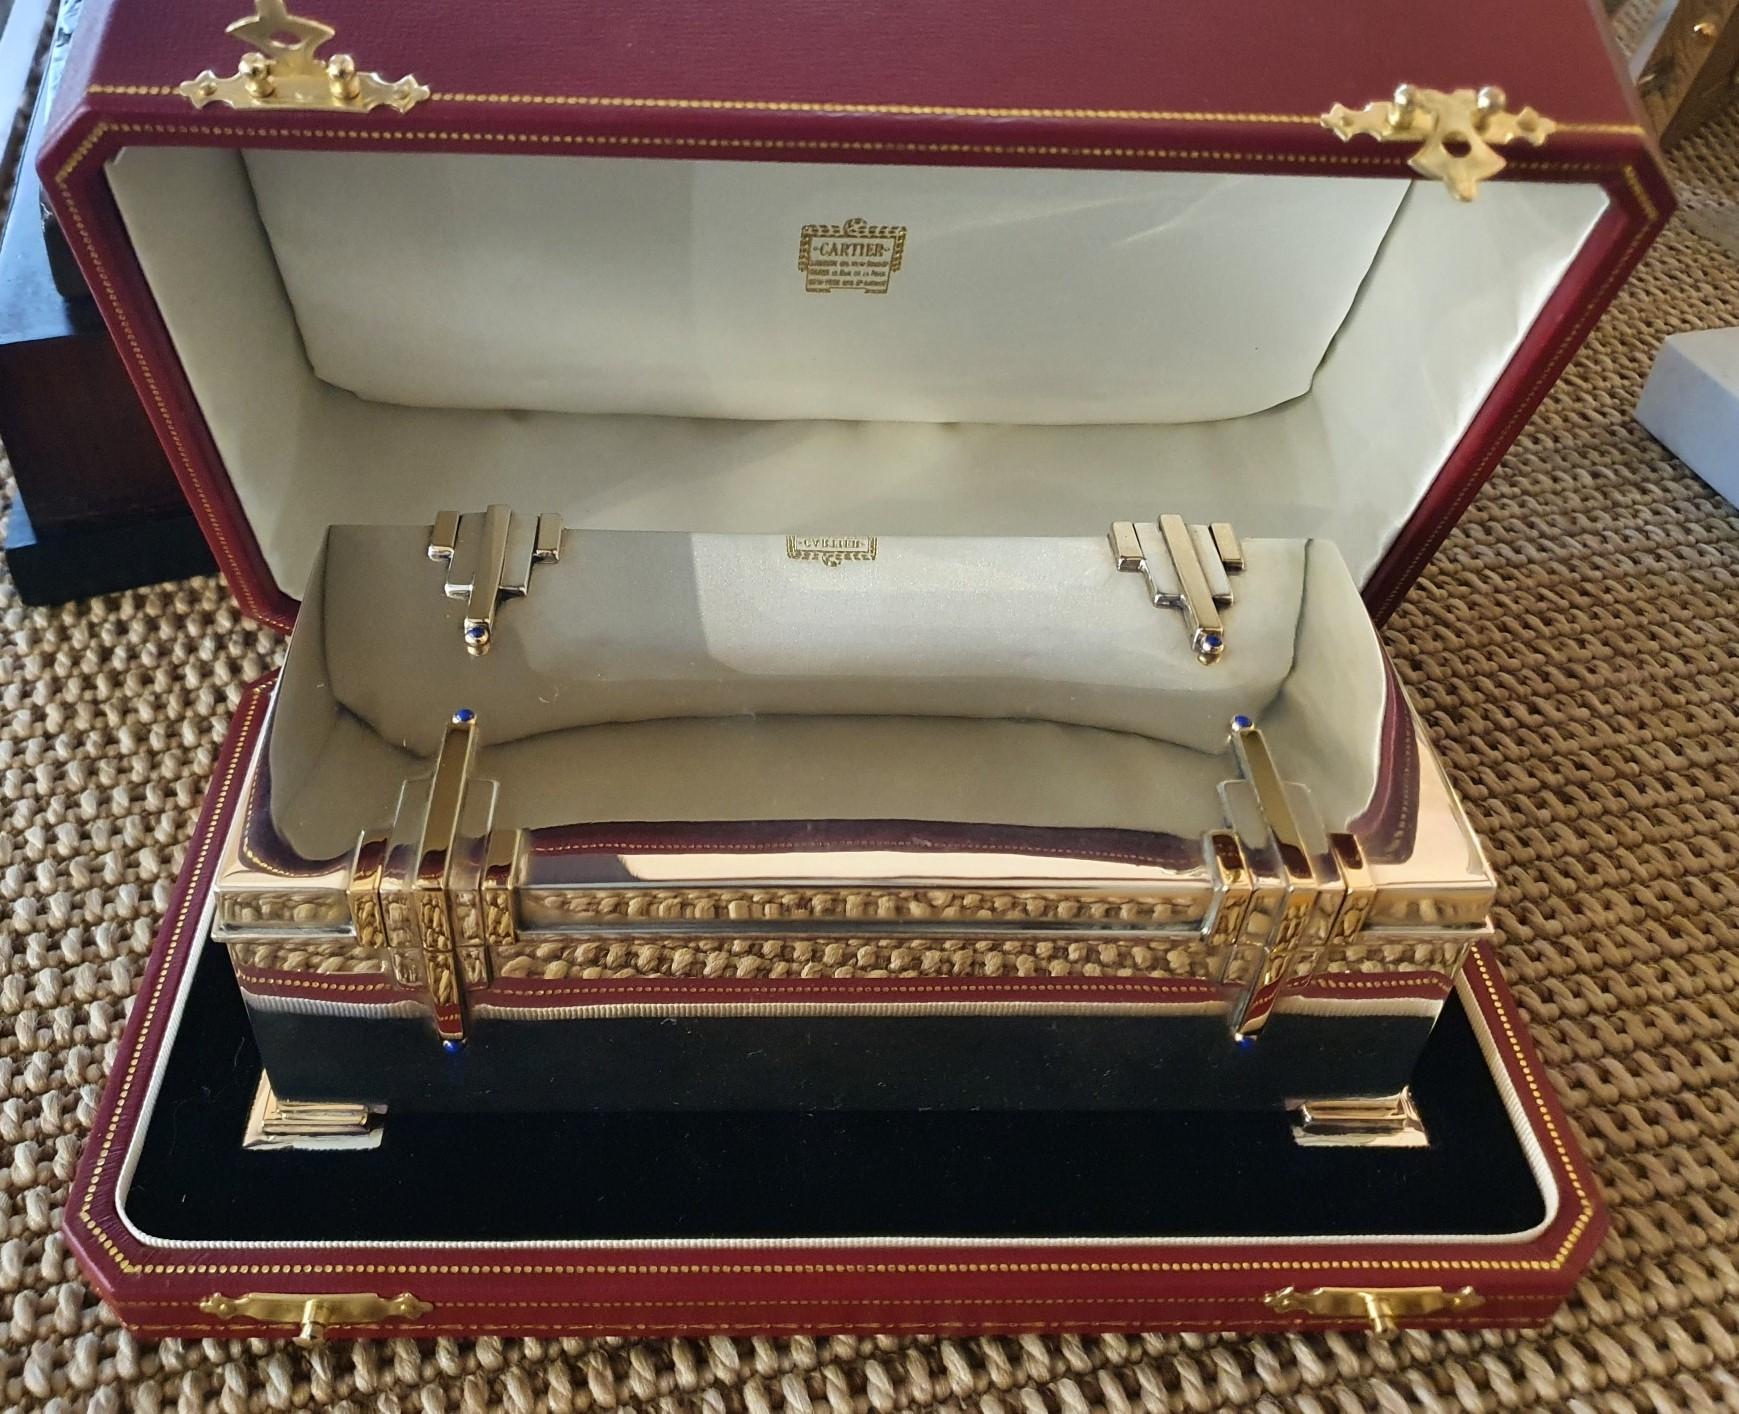 Cartier, New York

A magnificently stylish Sterling silver cigar box of high Art Deco style by Cartier, New York, circa 1930, the rectangular box with stepped pyramid motif set to the lid and sides in applied Sterling silver and 14ct gold, each